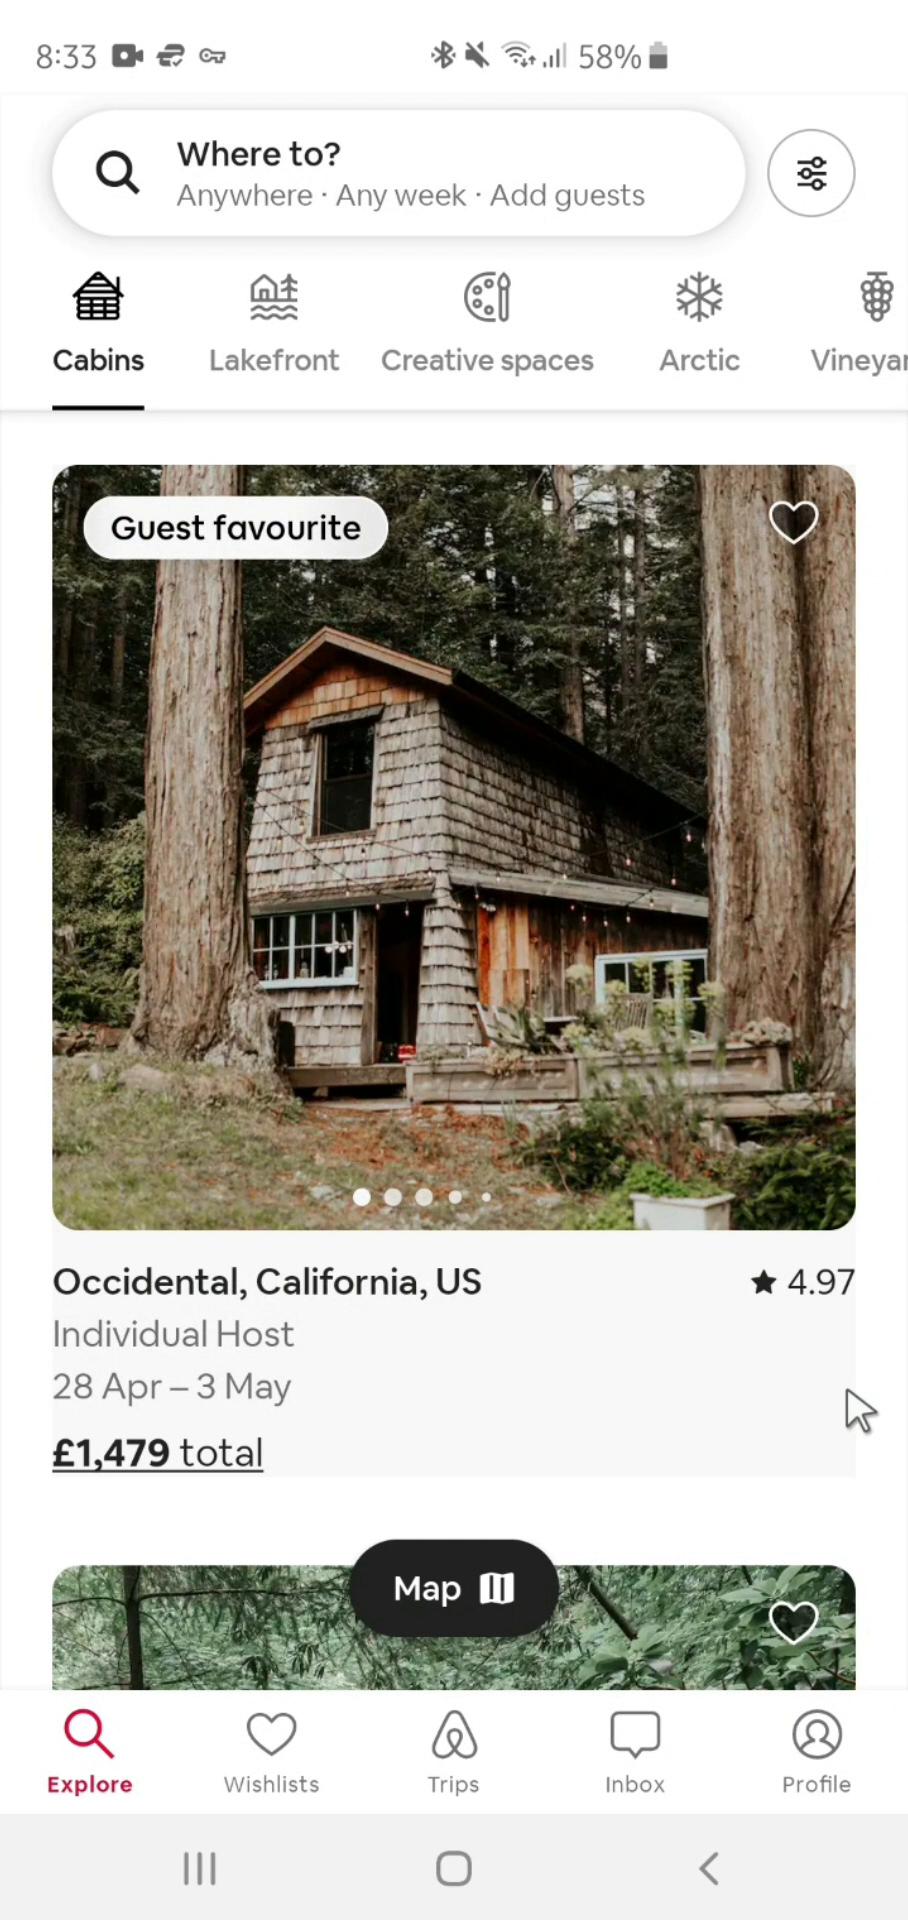 Screenshot of Updating profile settings on Airbnb